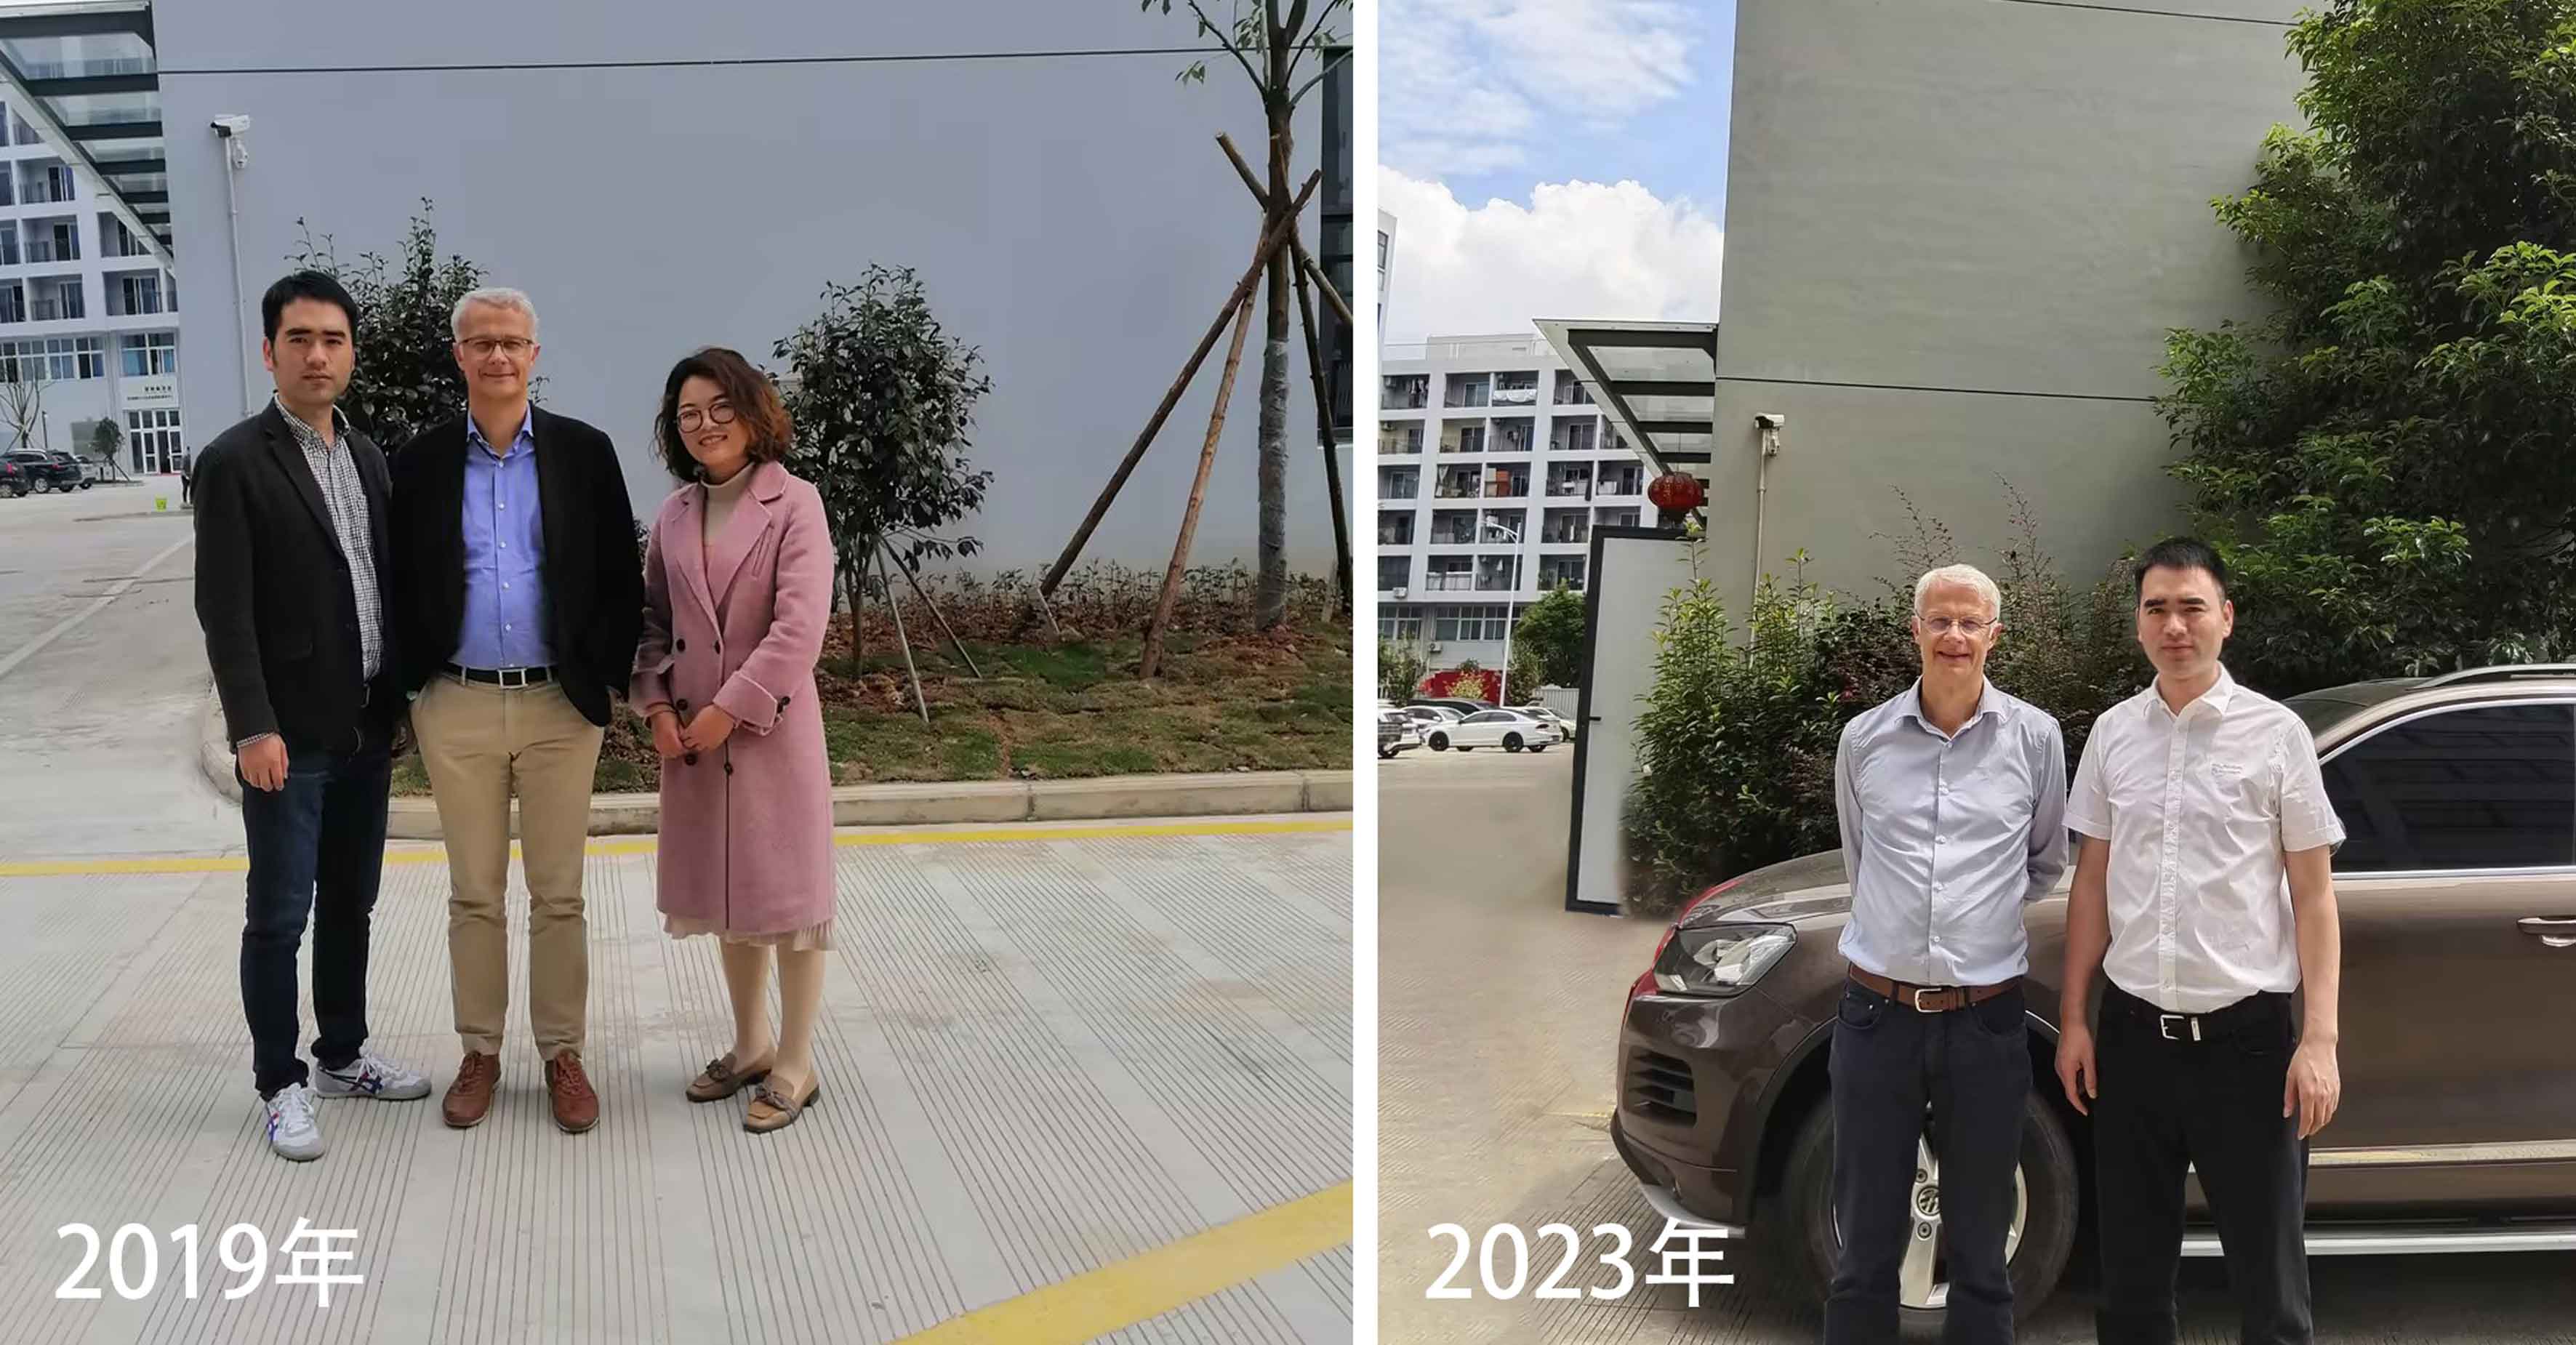 The 4-year time machine from 2019 to 2023 - the French customer visited Tonhe again